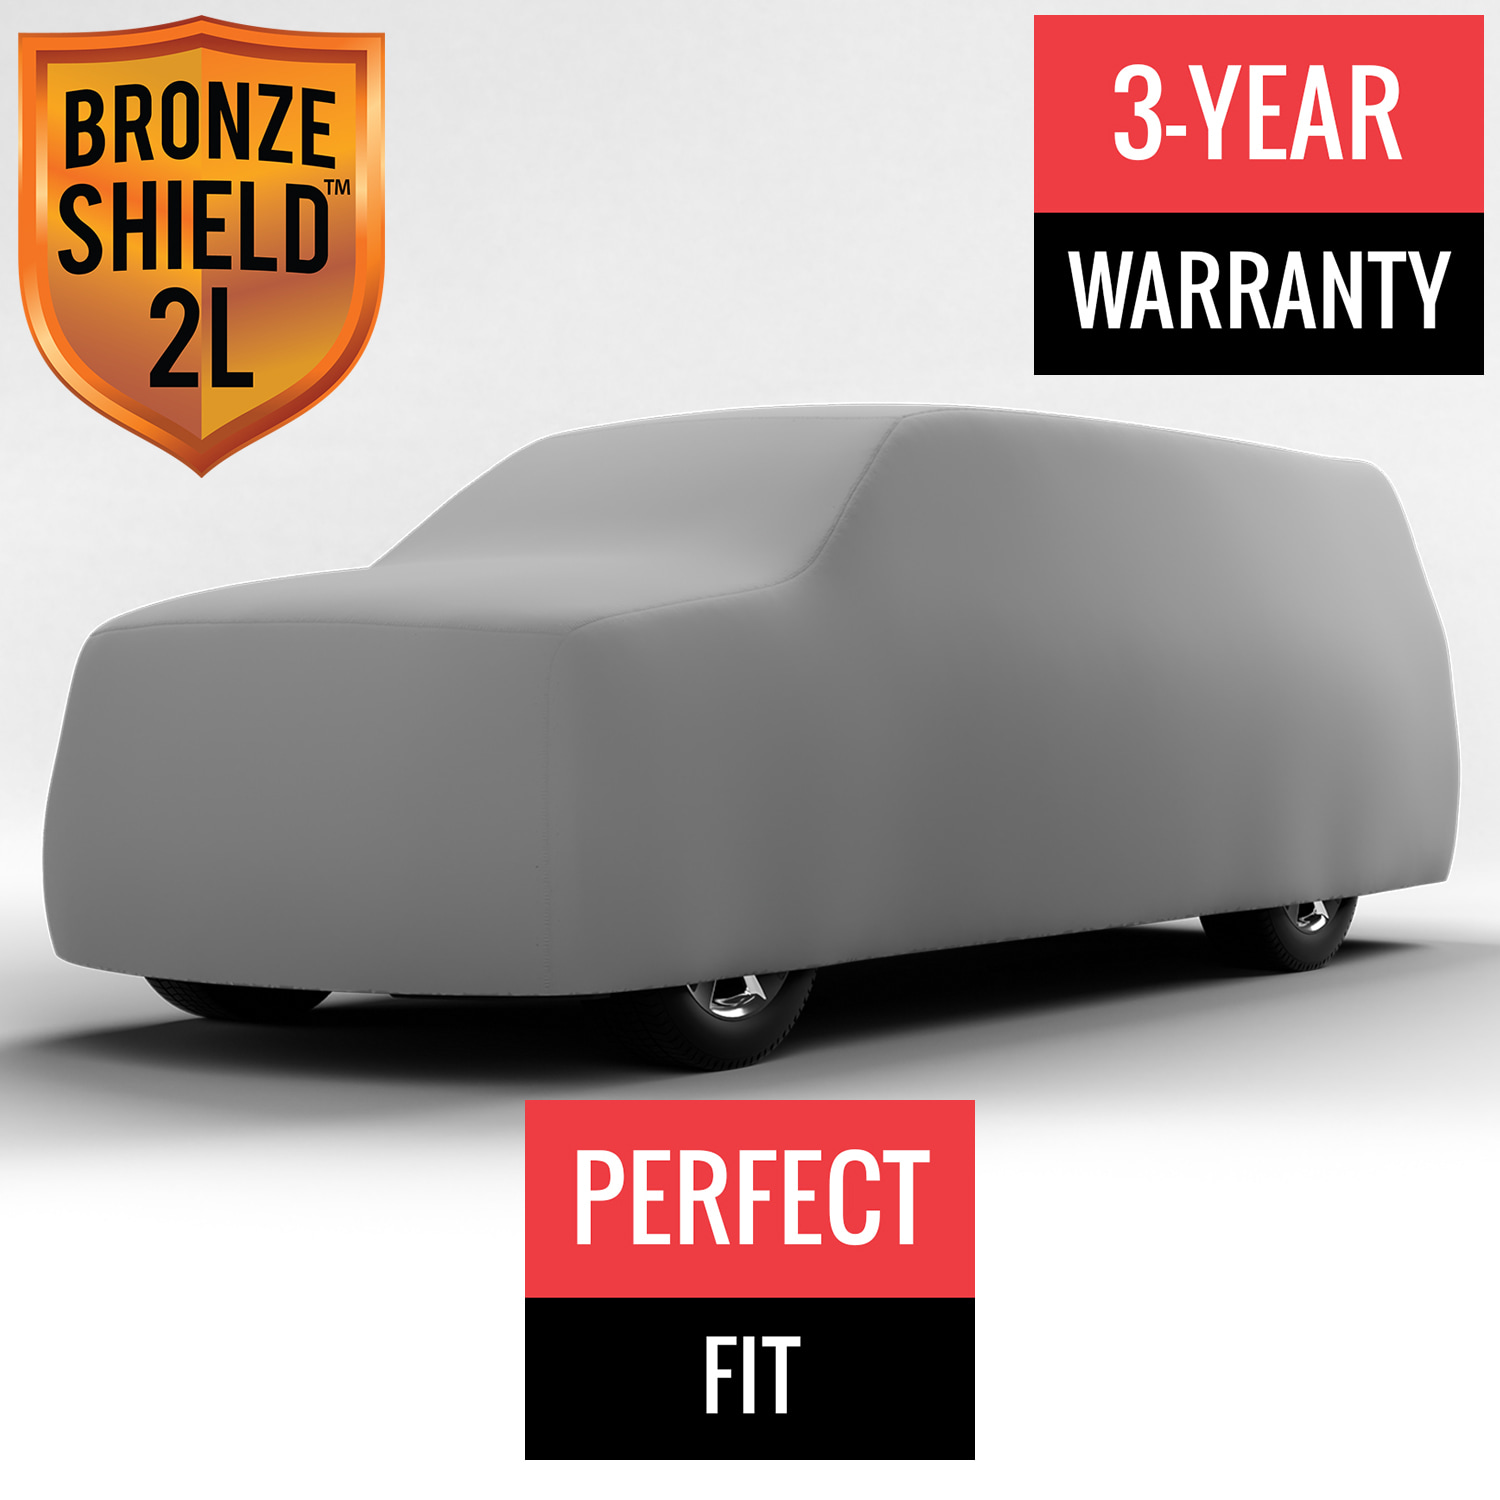 Bronze Shield 2L - Car Cover for GMC K15 Pickup 1972 Regular Cab Pickup 6.5 Feet Bed with Camper Shell